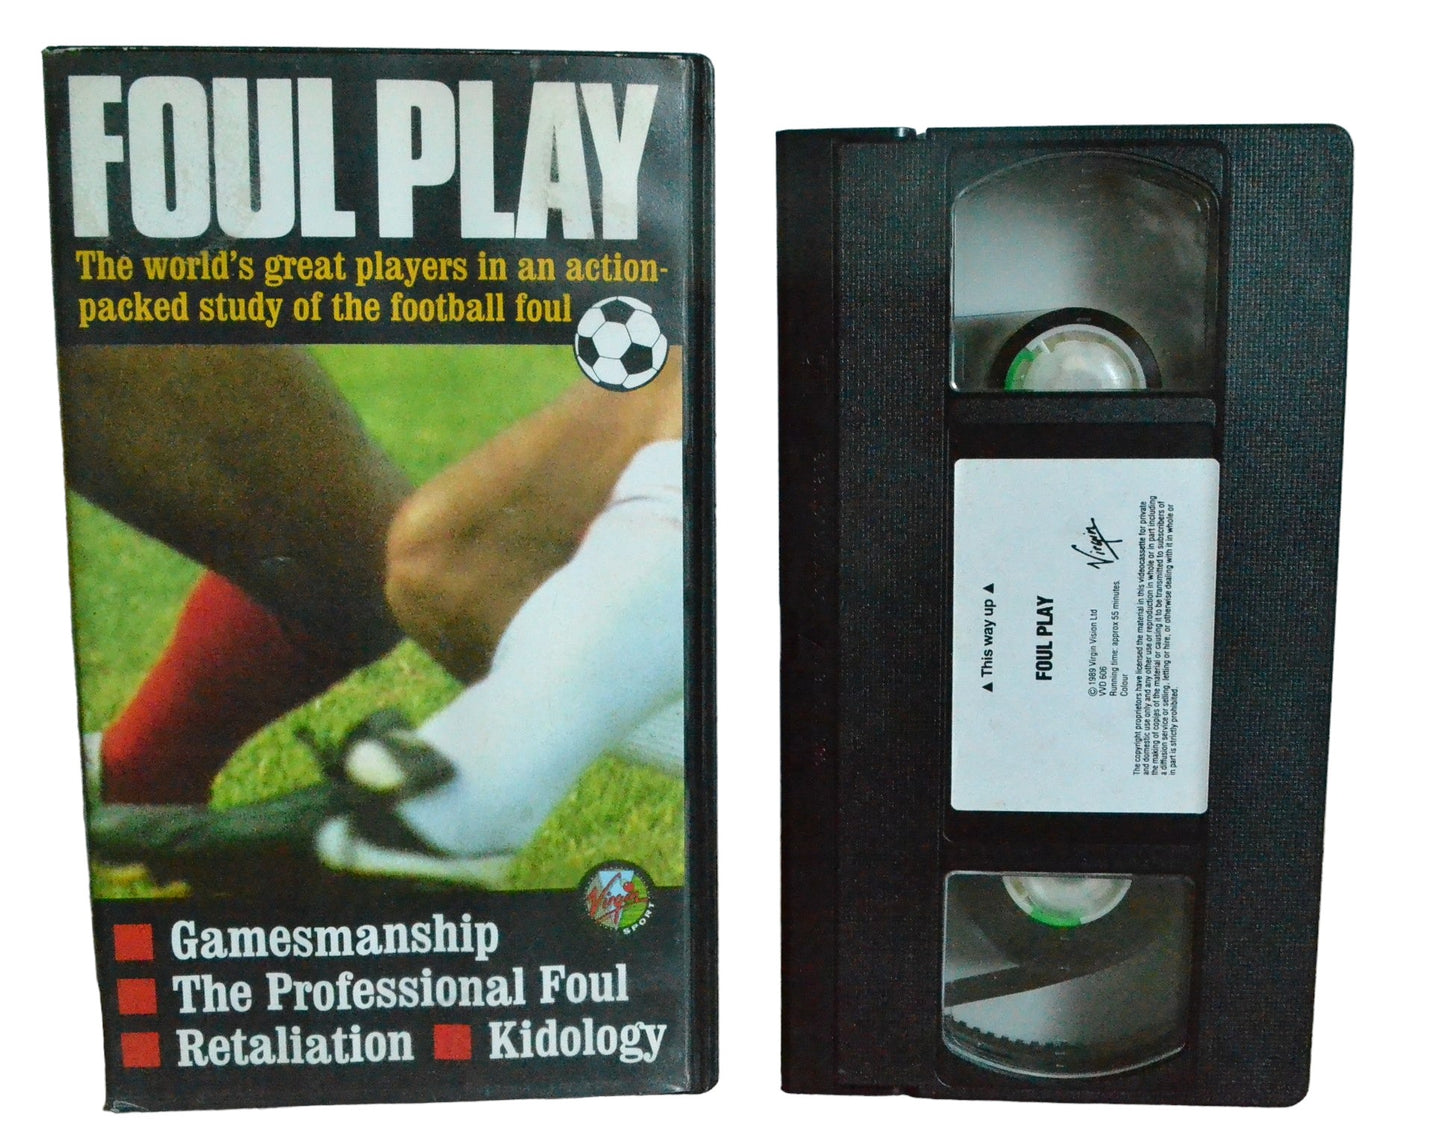 Foul Play (The World's Great Players in An Action-Packed) - Virgin Video - VVD606 - Drama - Pal - VHS-